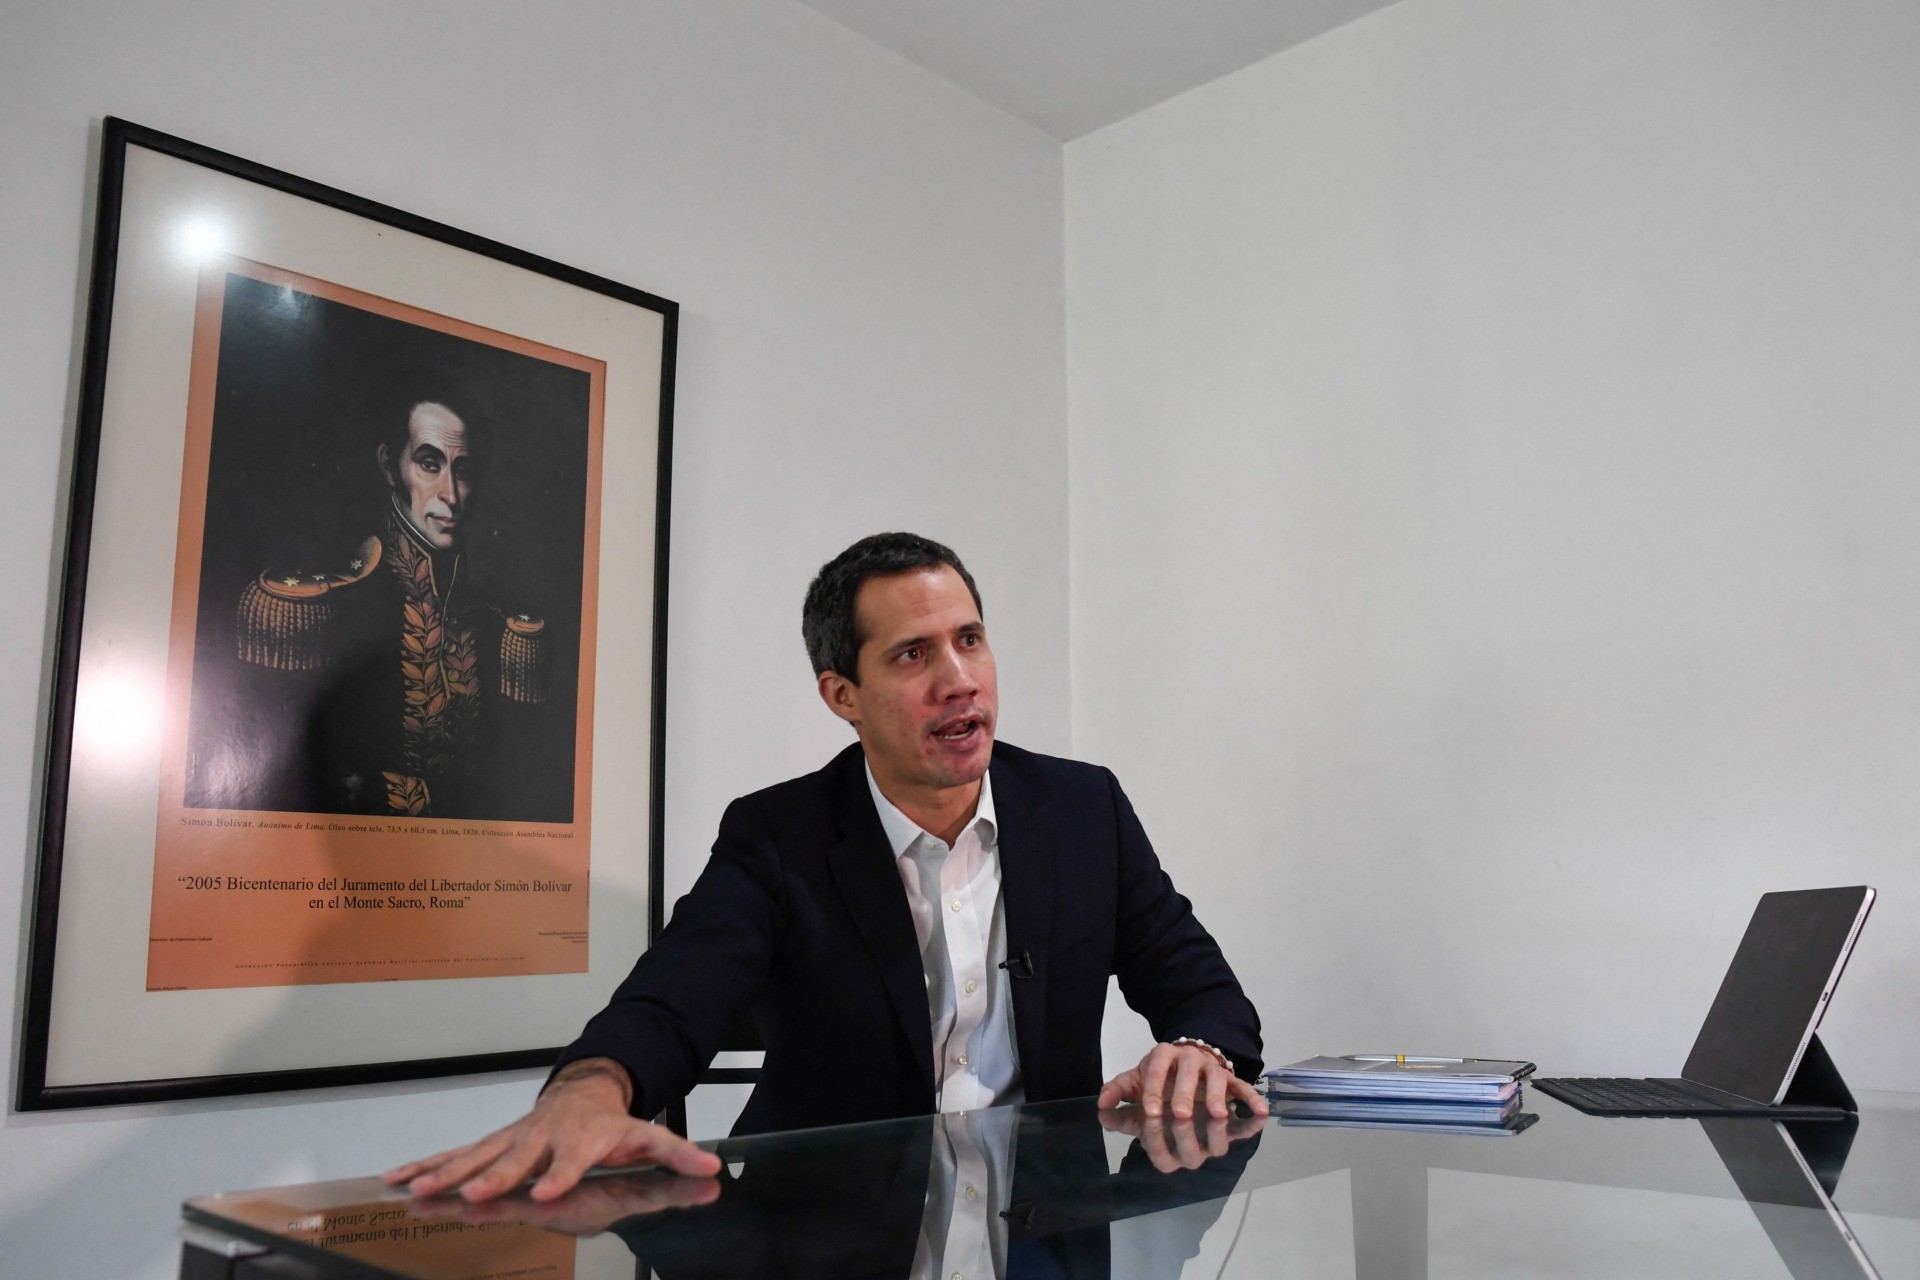 Venezuelan opposition leader Juan Guaido gestures as he speaks during an interview with the AFP at his home in Caracas on August 25, 2021. (Photo by Federico PARRA / AFP) (Photo by FEDERICO PARRA/AFP via Getty Images)